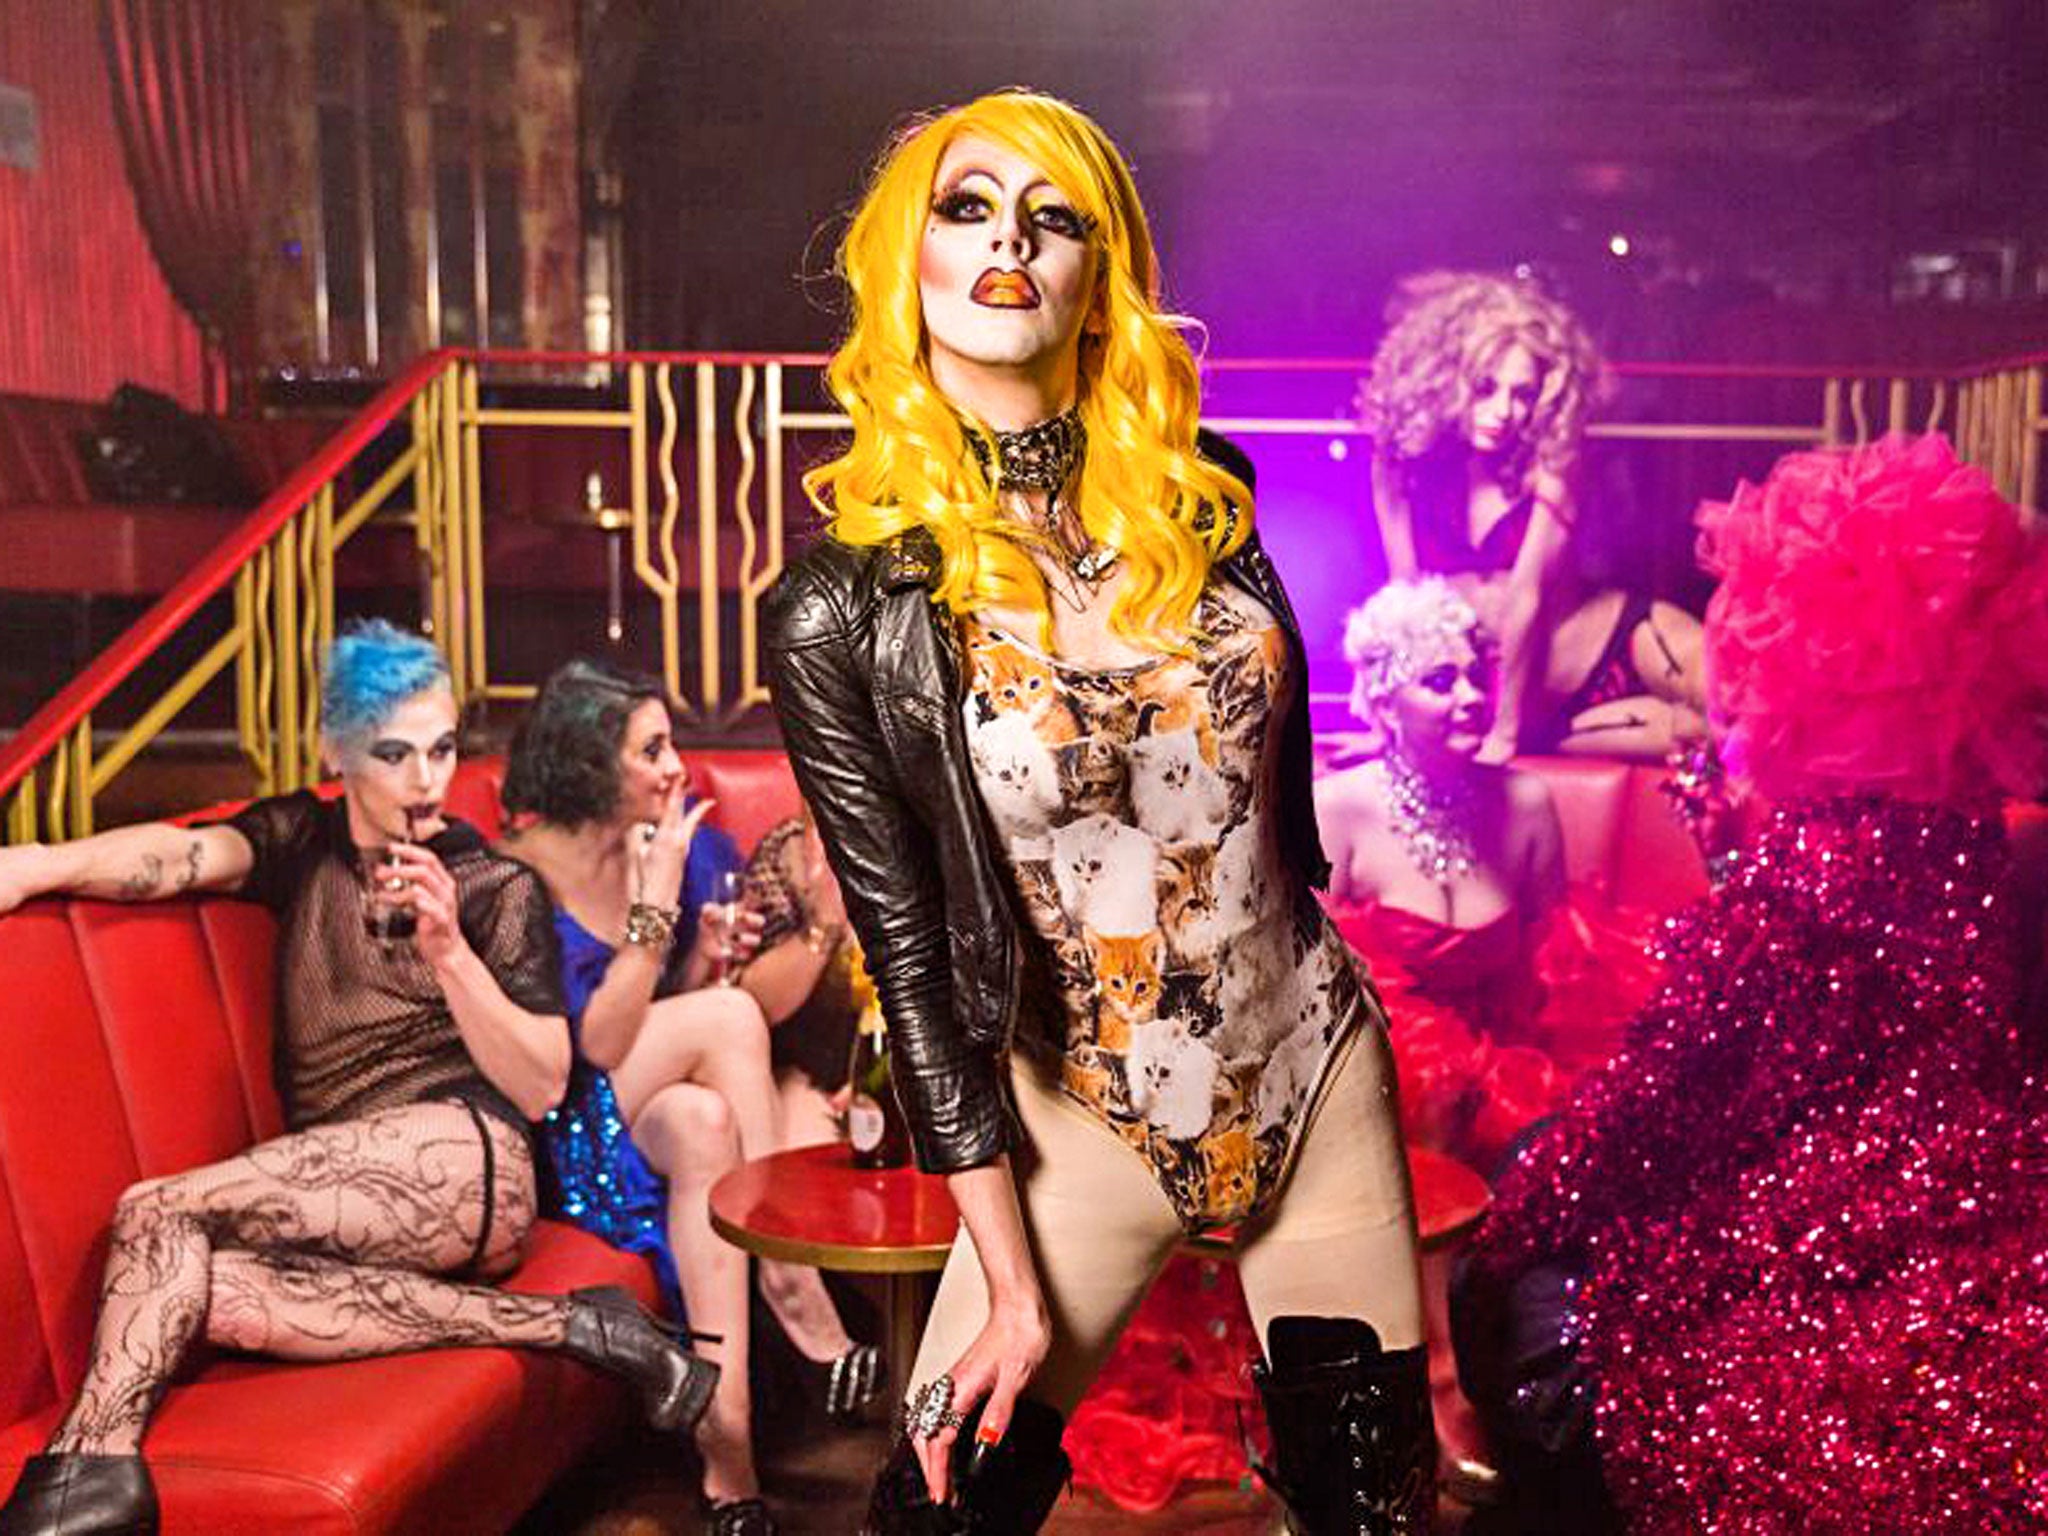 The next wig thing: 'Drag Queens of London'